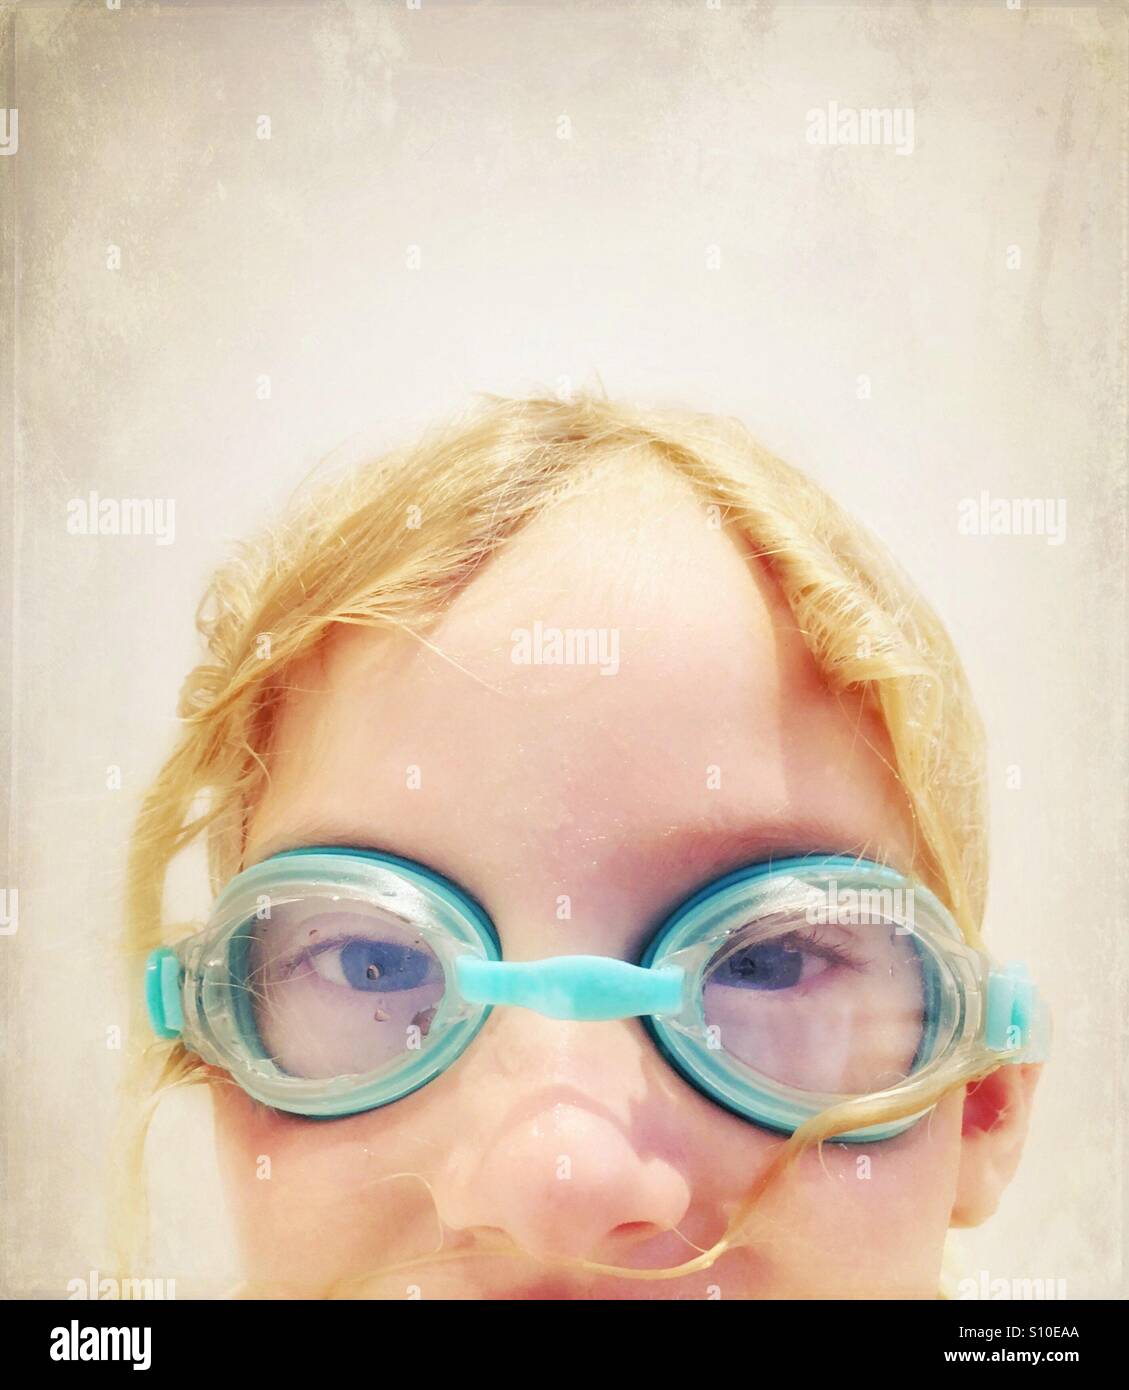 Young girl wearing blue swimming goggles looking directly at camera Stock Photo